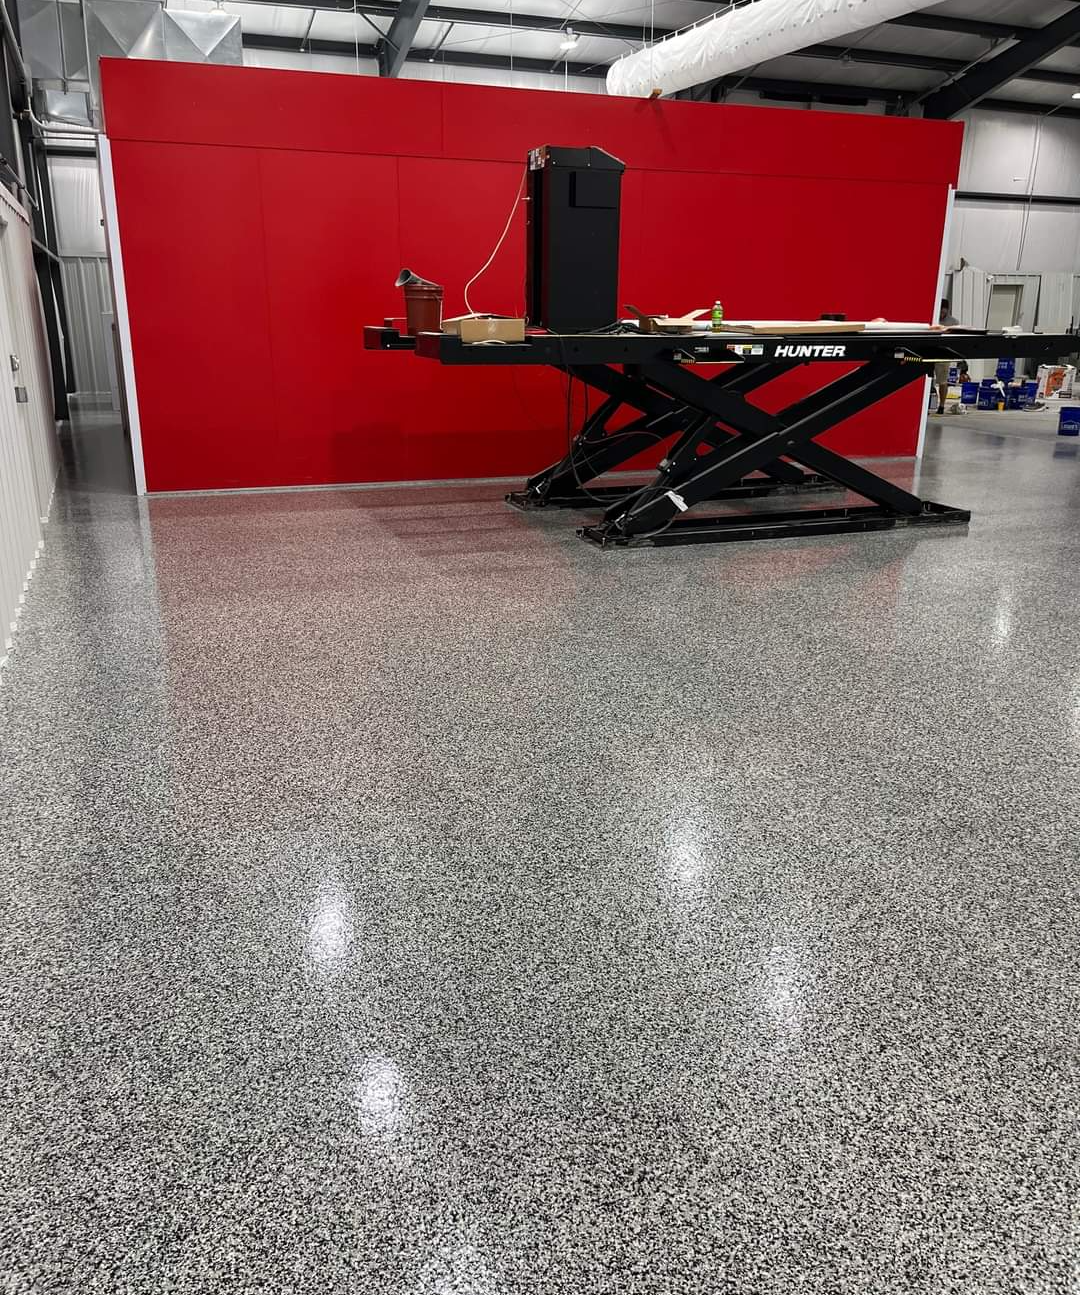 A scissor lift sits in the back of this garage that has freshly installed epoxy floors.